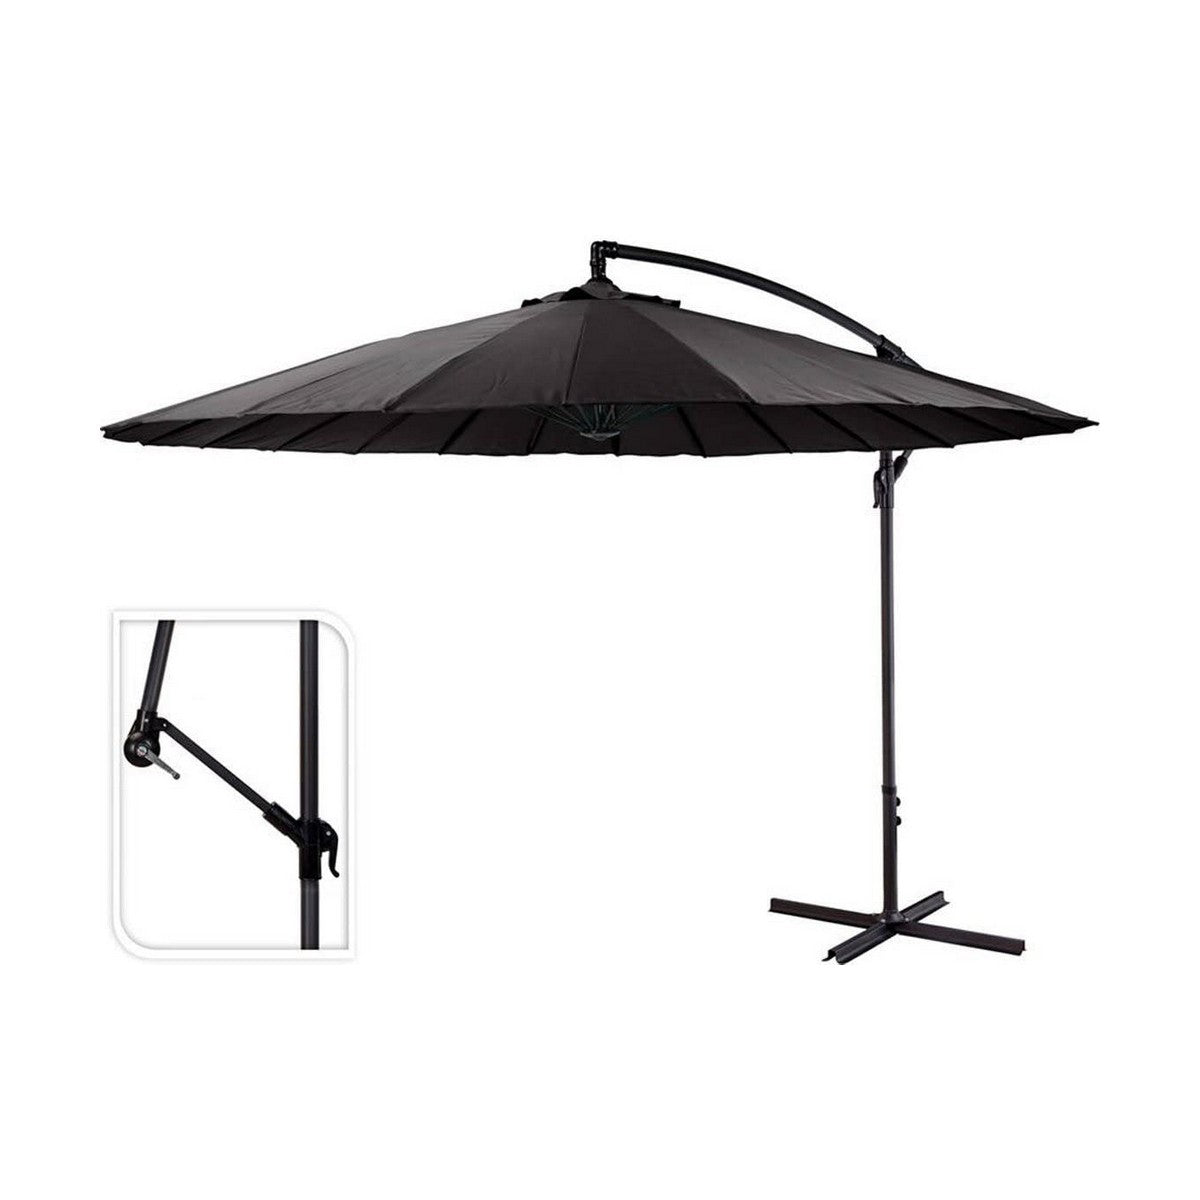 Parasol basculante y giratorio Deported Ambiance Loft Gris Oscuro 